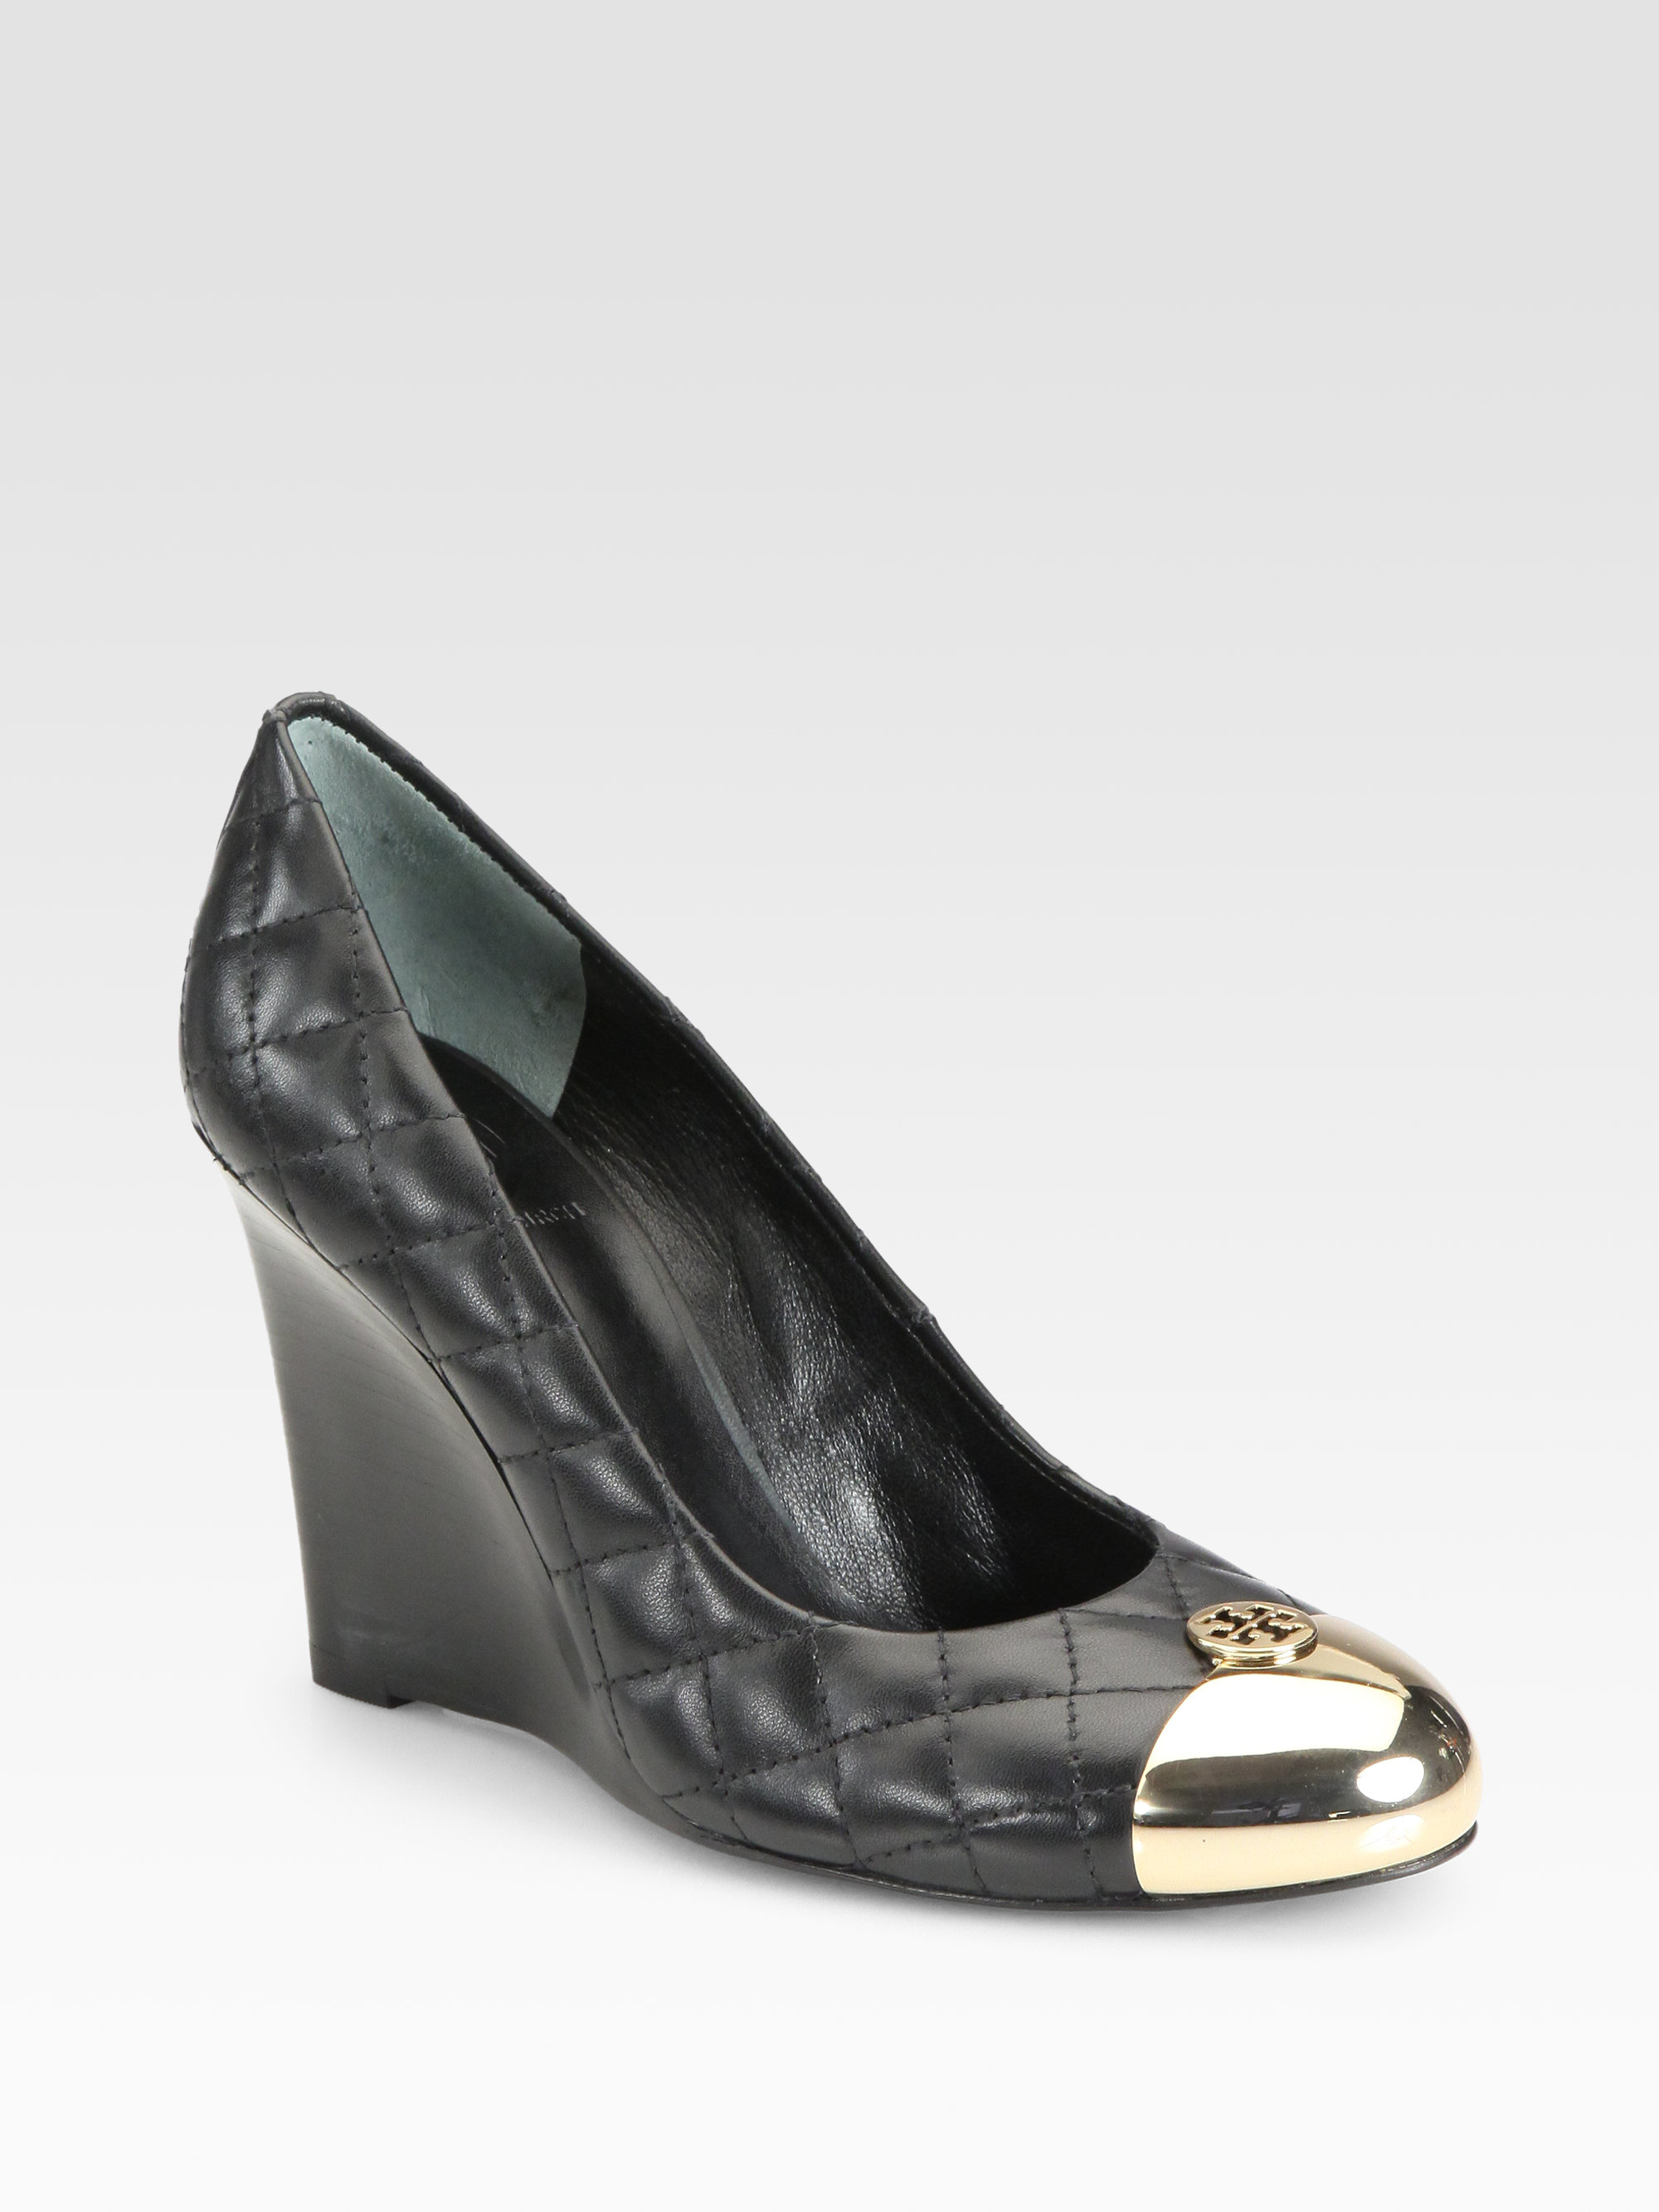 Tory Burch Kaitlin Quilted Leather Wedge Pumps in Black | Lyst